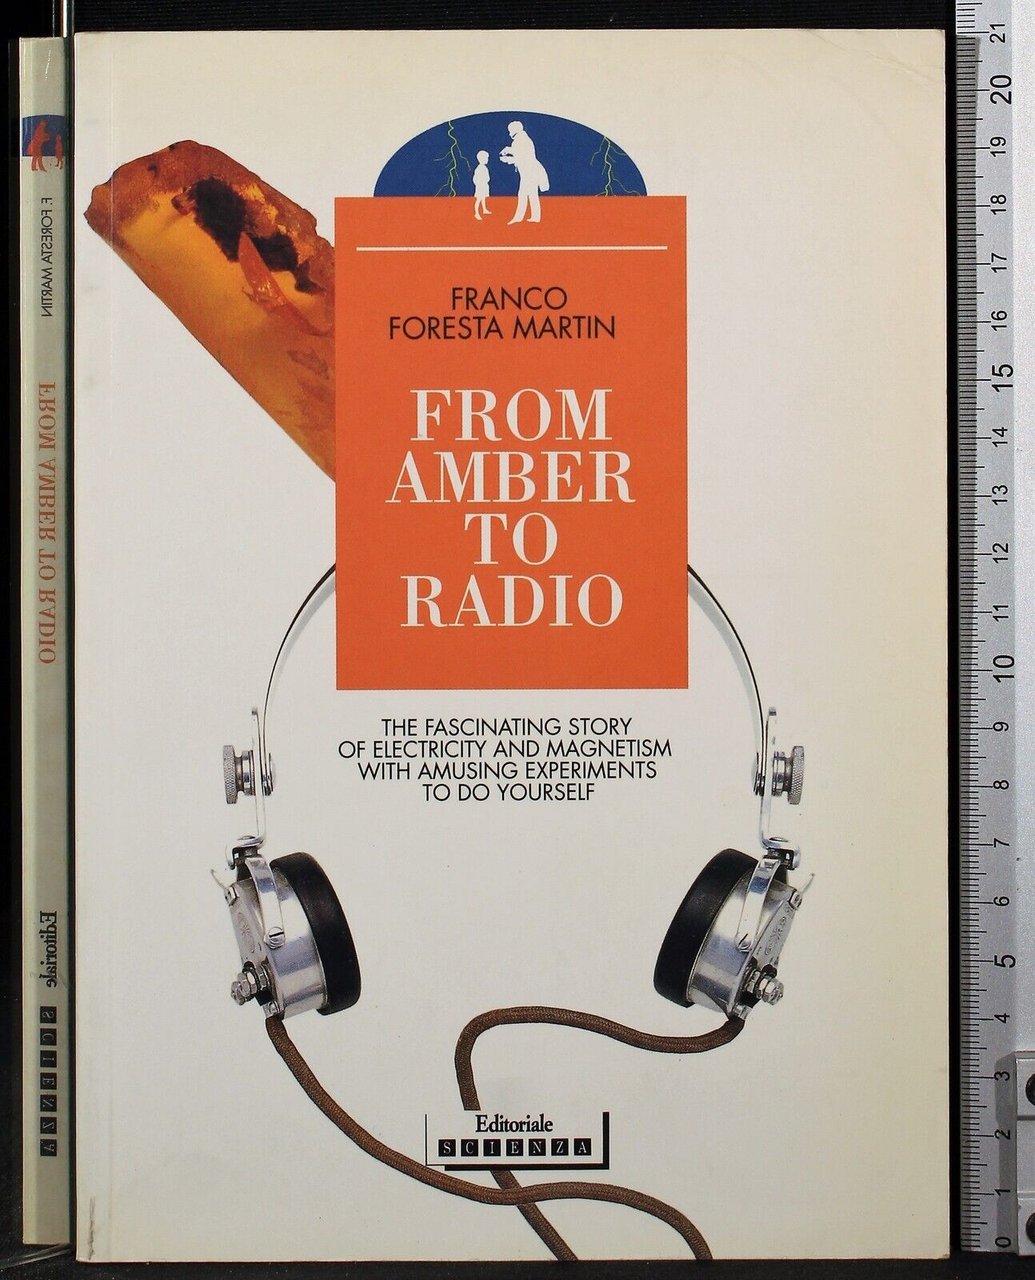 From amber to radio